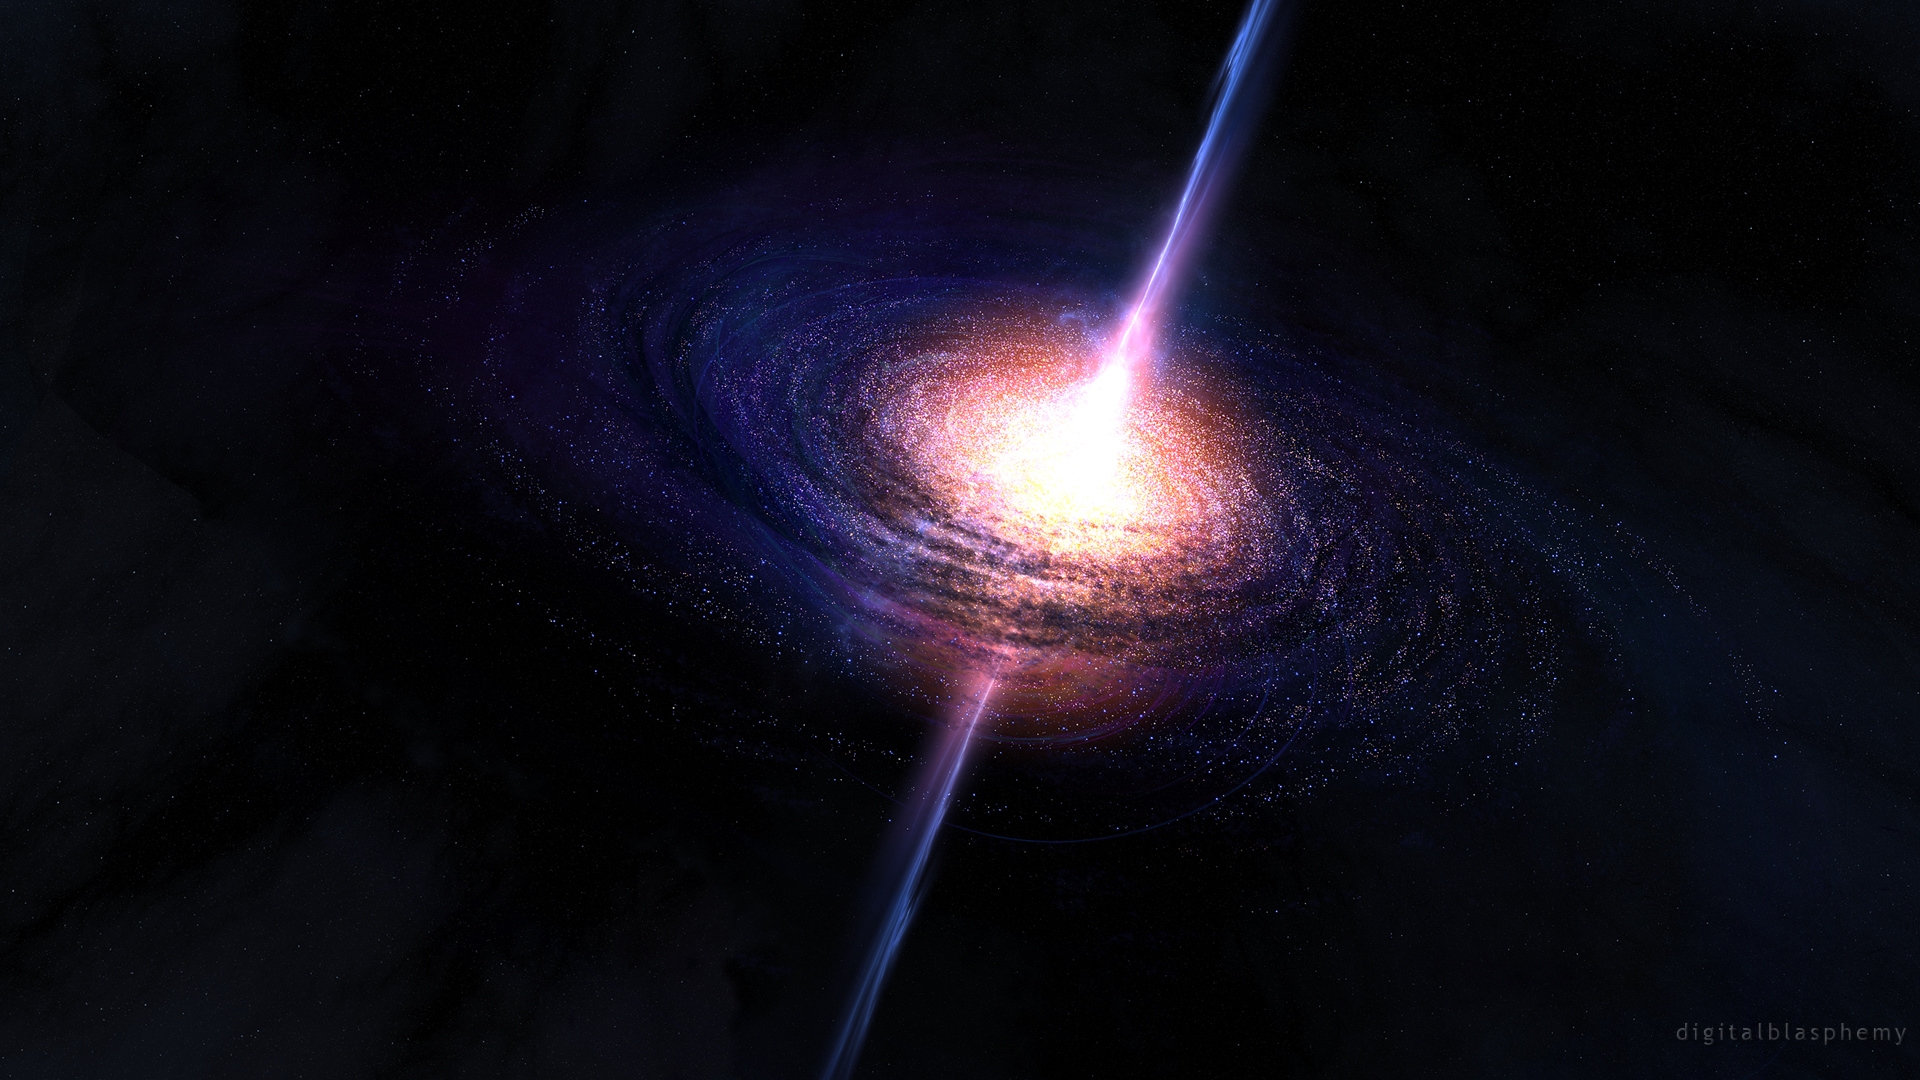 A New Approach To Measure The Mass Of Intergalactic Black Holes